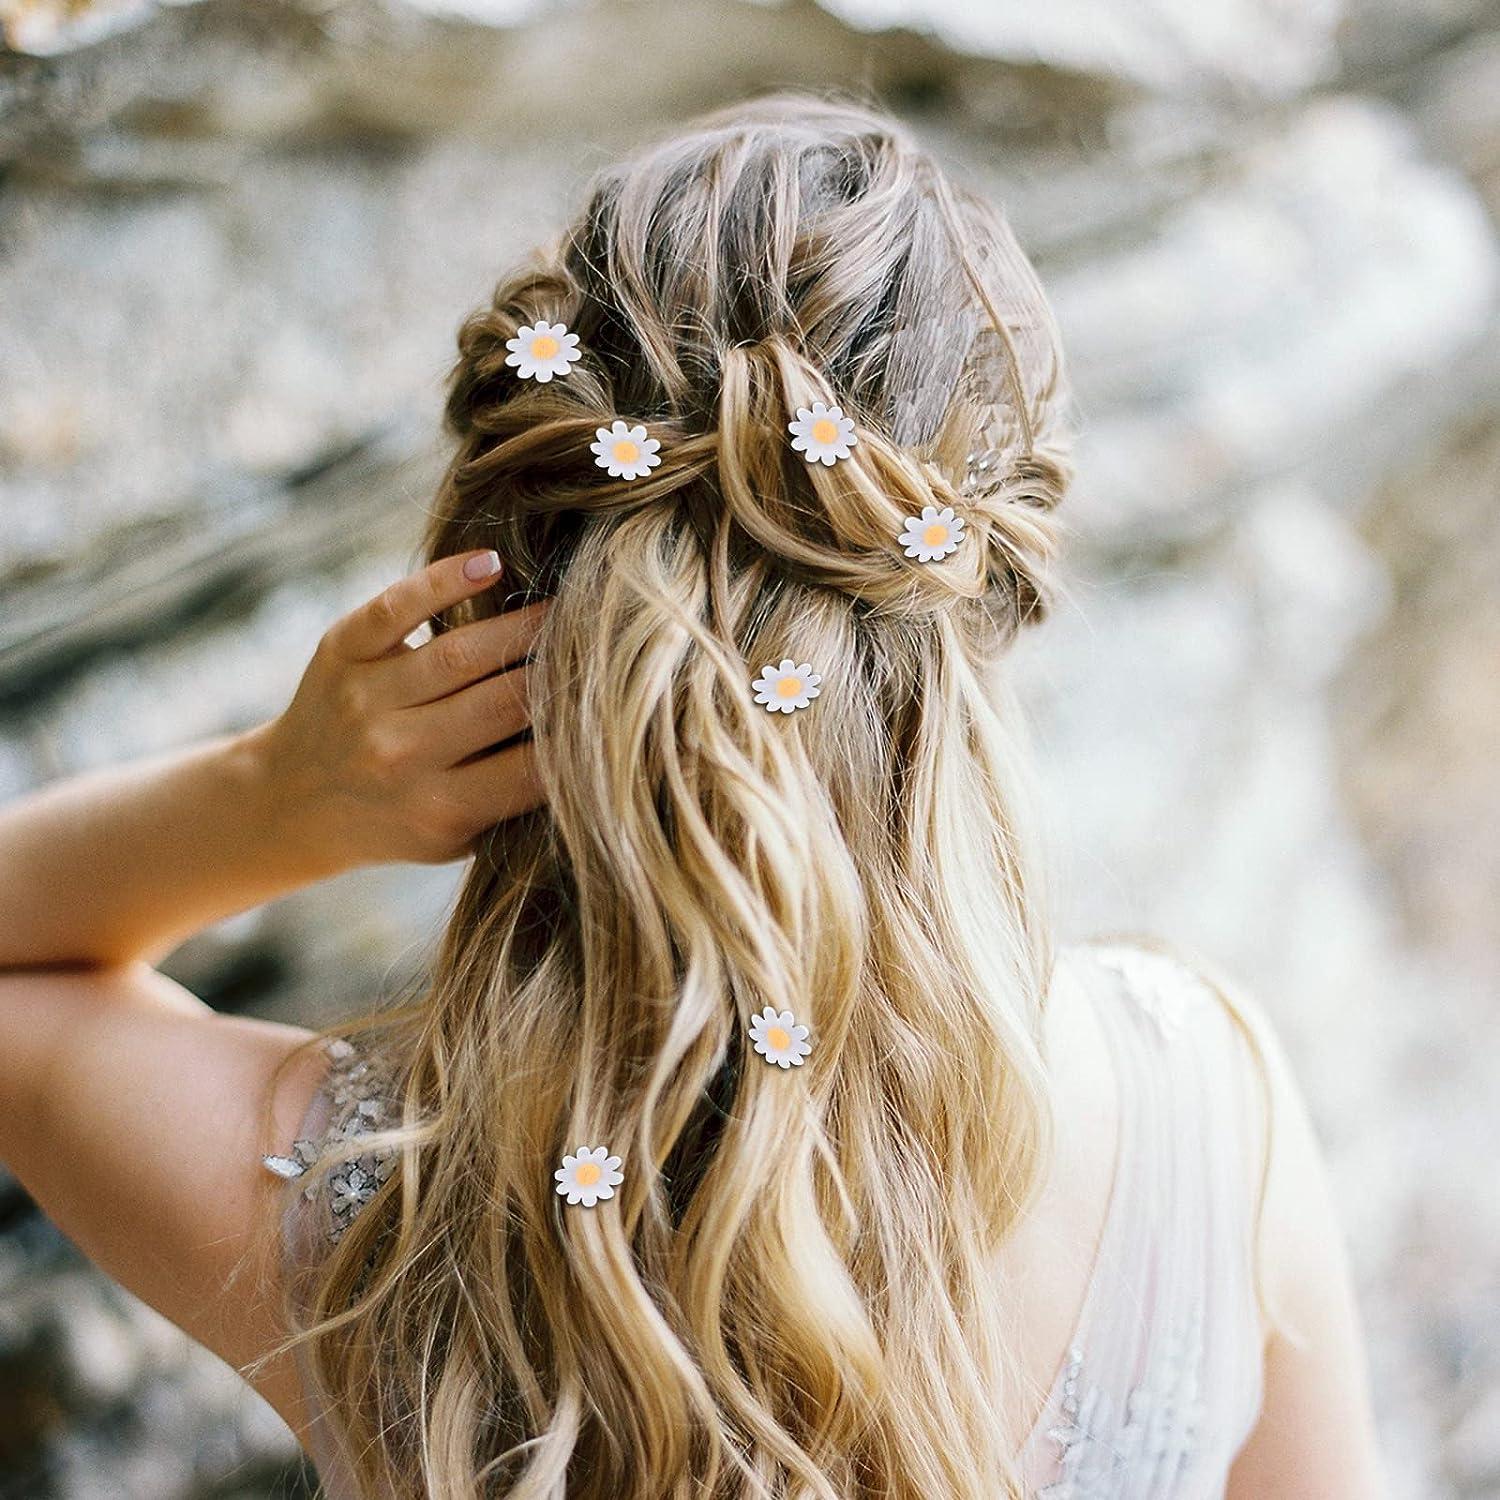 12 Elegant Hairstyle Ideas For Your Wedding | BRIDE online